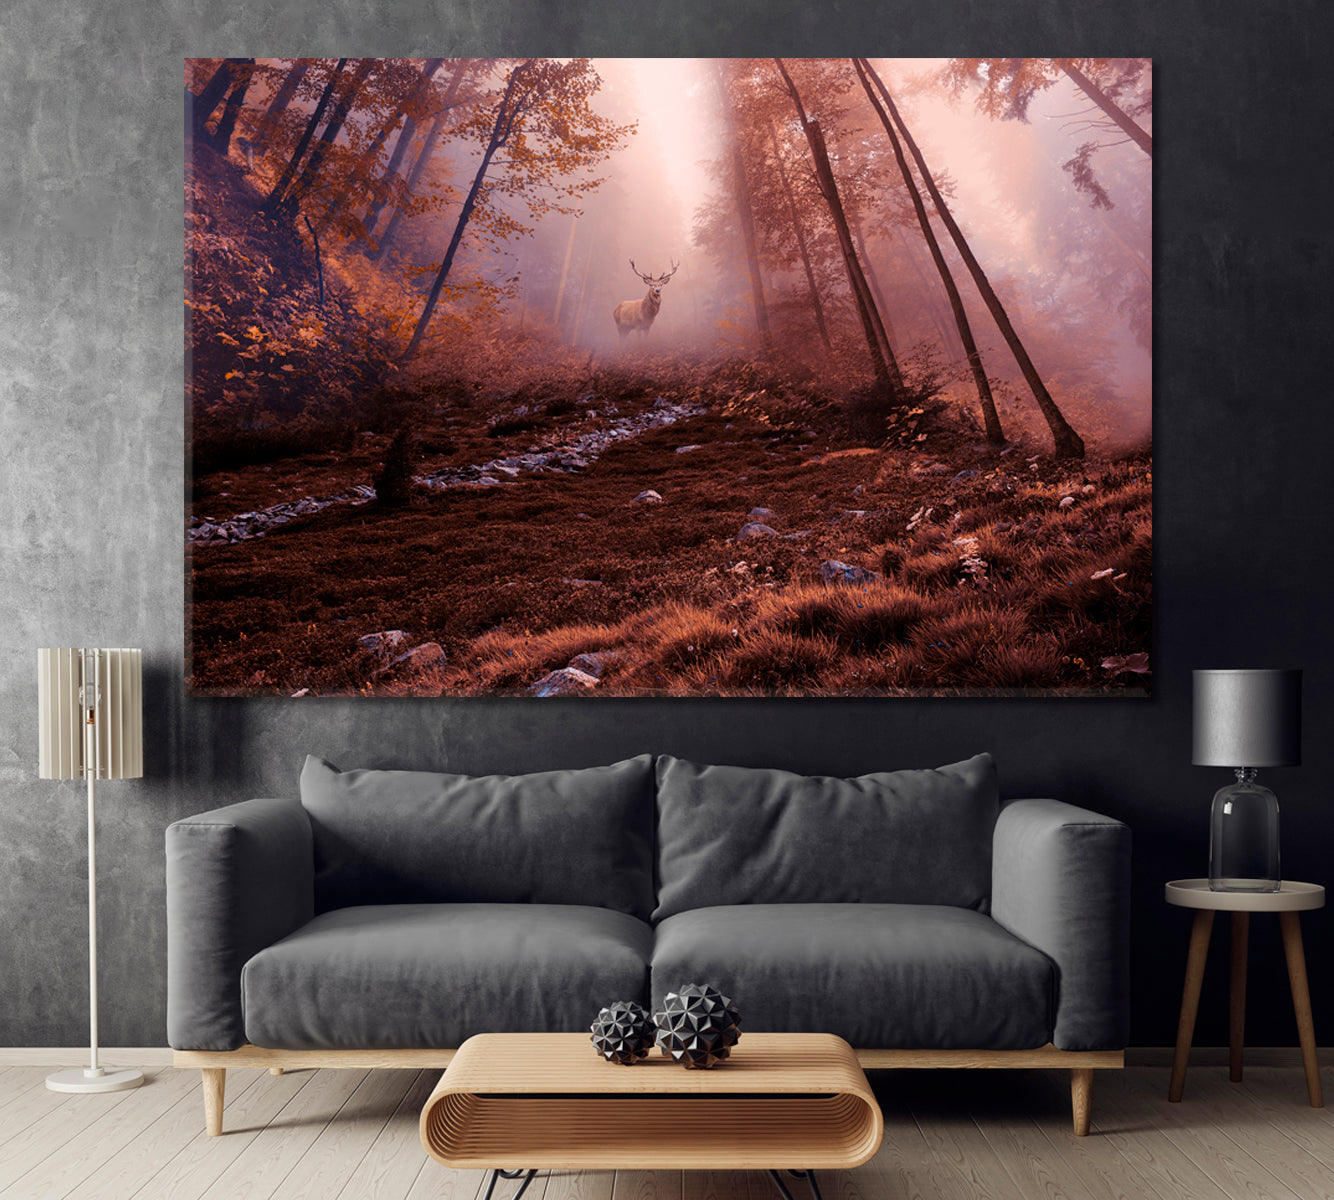 Red Deer in Foggy Autumn Forest Canvas Print ArtLexy 1 Panel 24"x16" inches 